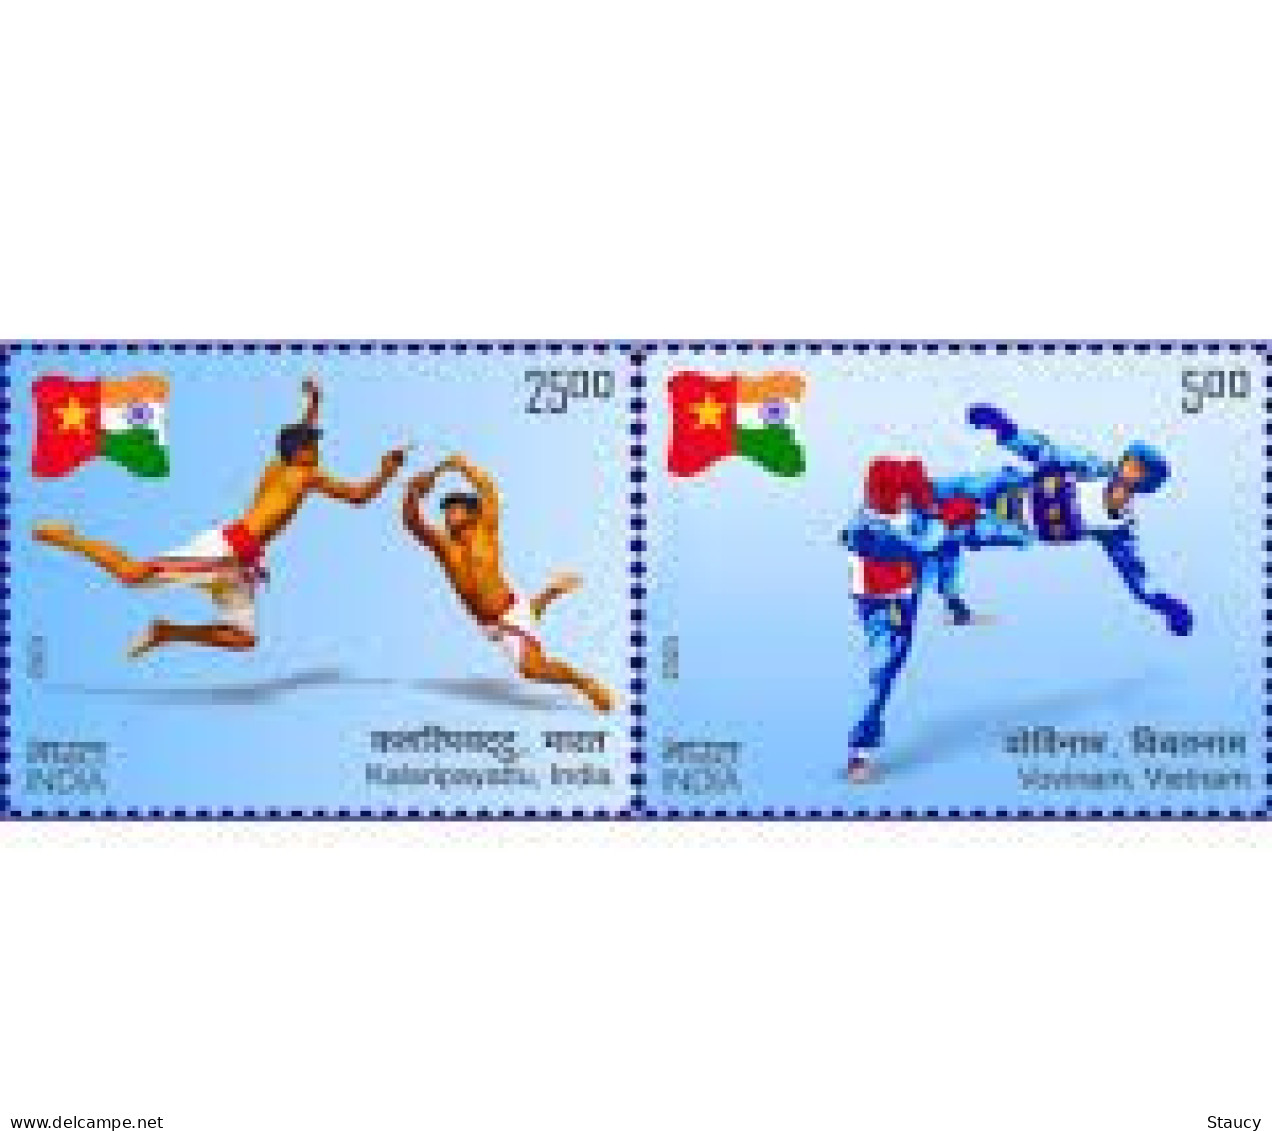 India 2023 India – Vietnam Joint Issue Collection: 2v SET + Miniature Sheet + First Day Cover As Per Scan - Ungebraucht